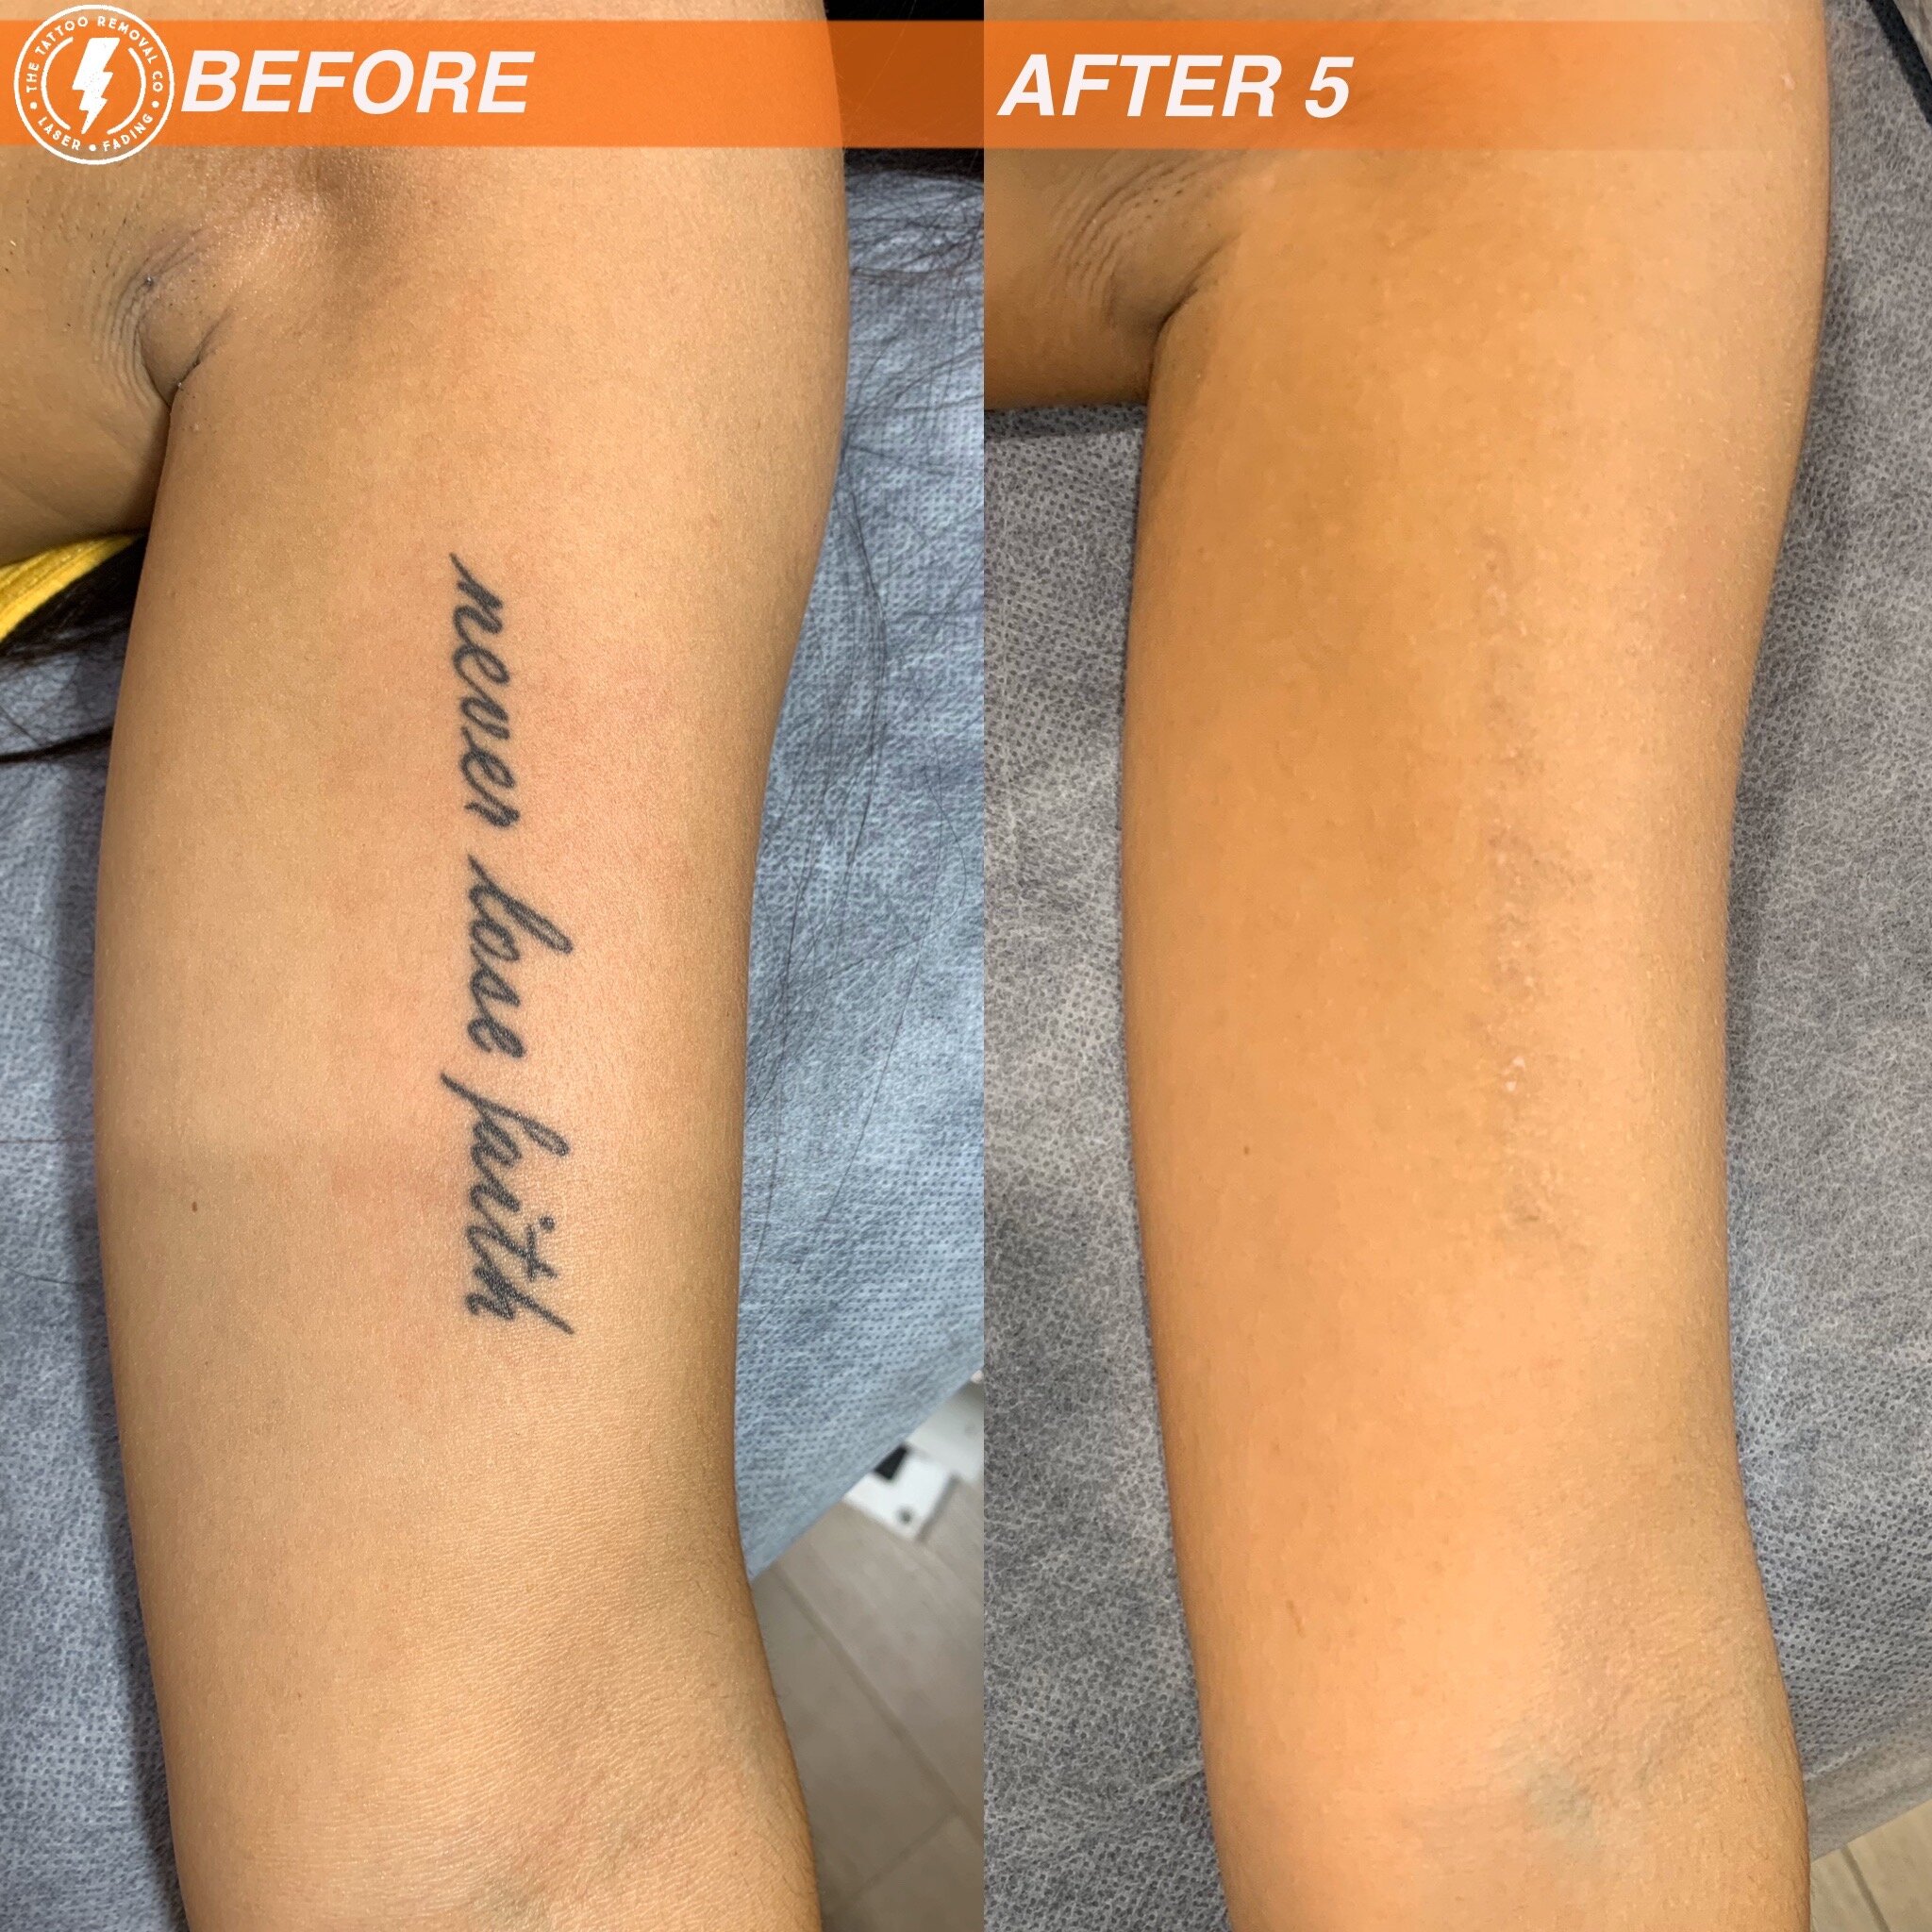 The Tattoo Removal Co.-Laser Tattoo Removal Adelaide